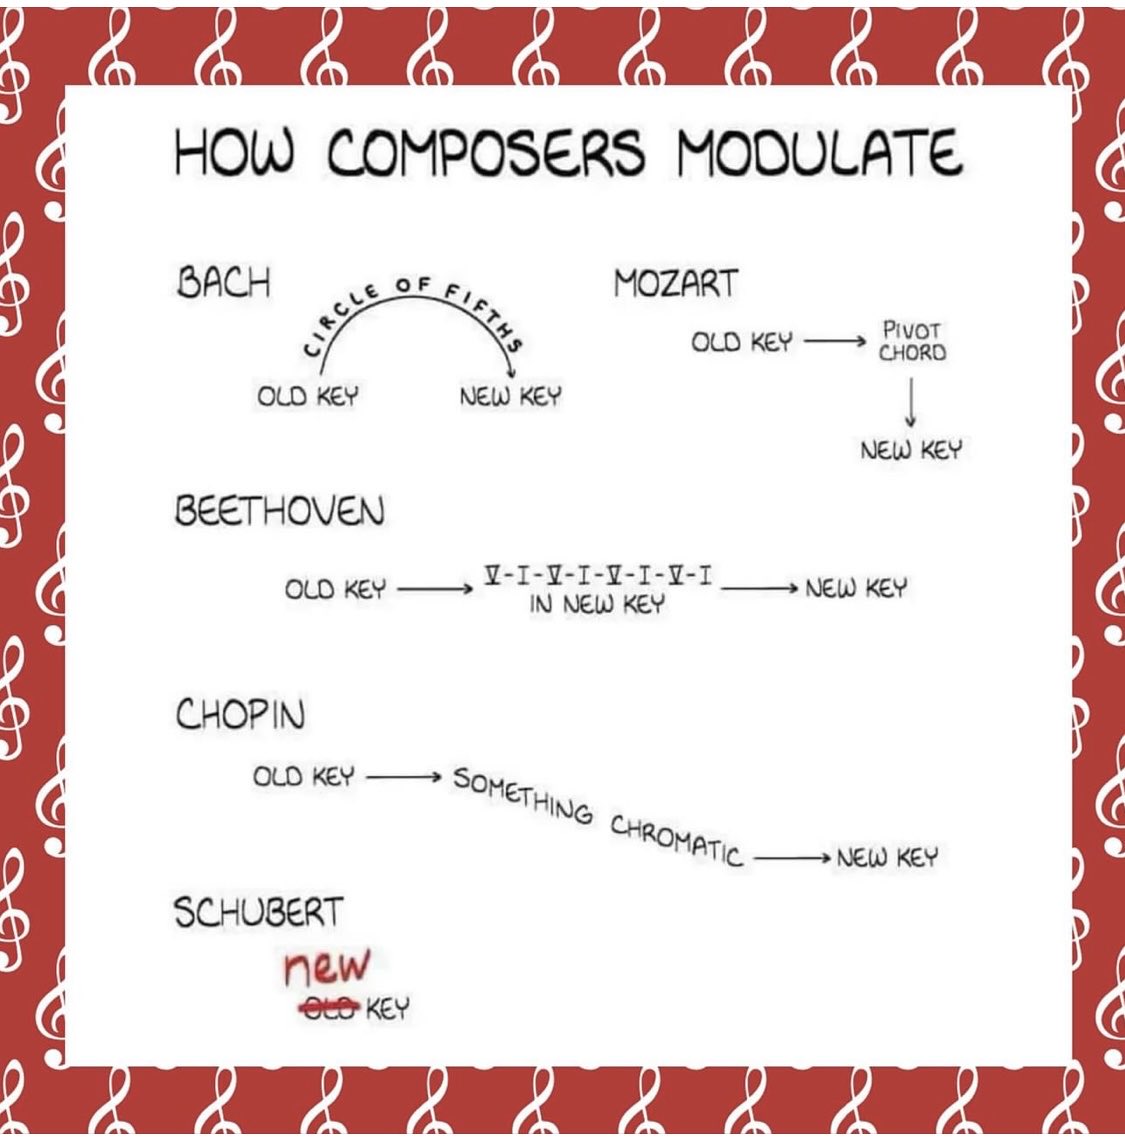 In case you need confirmation… #composers #music